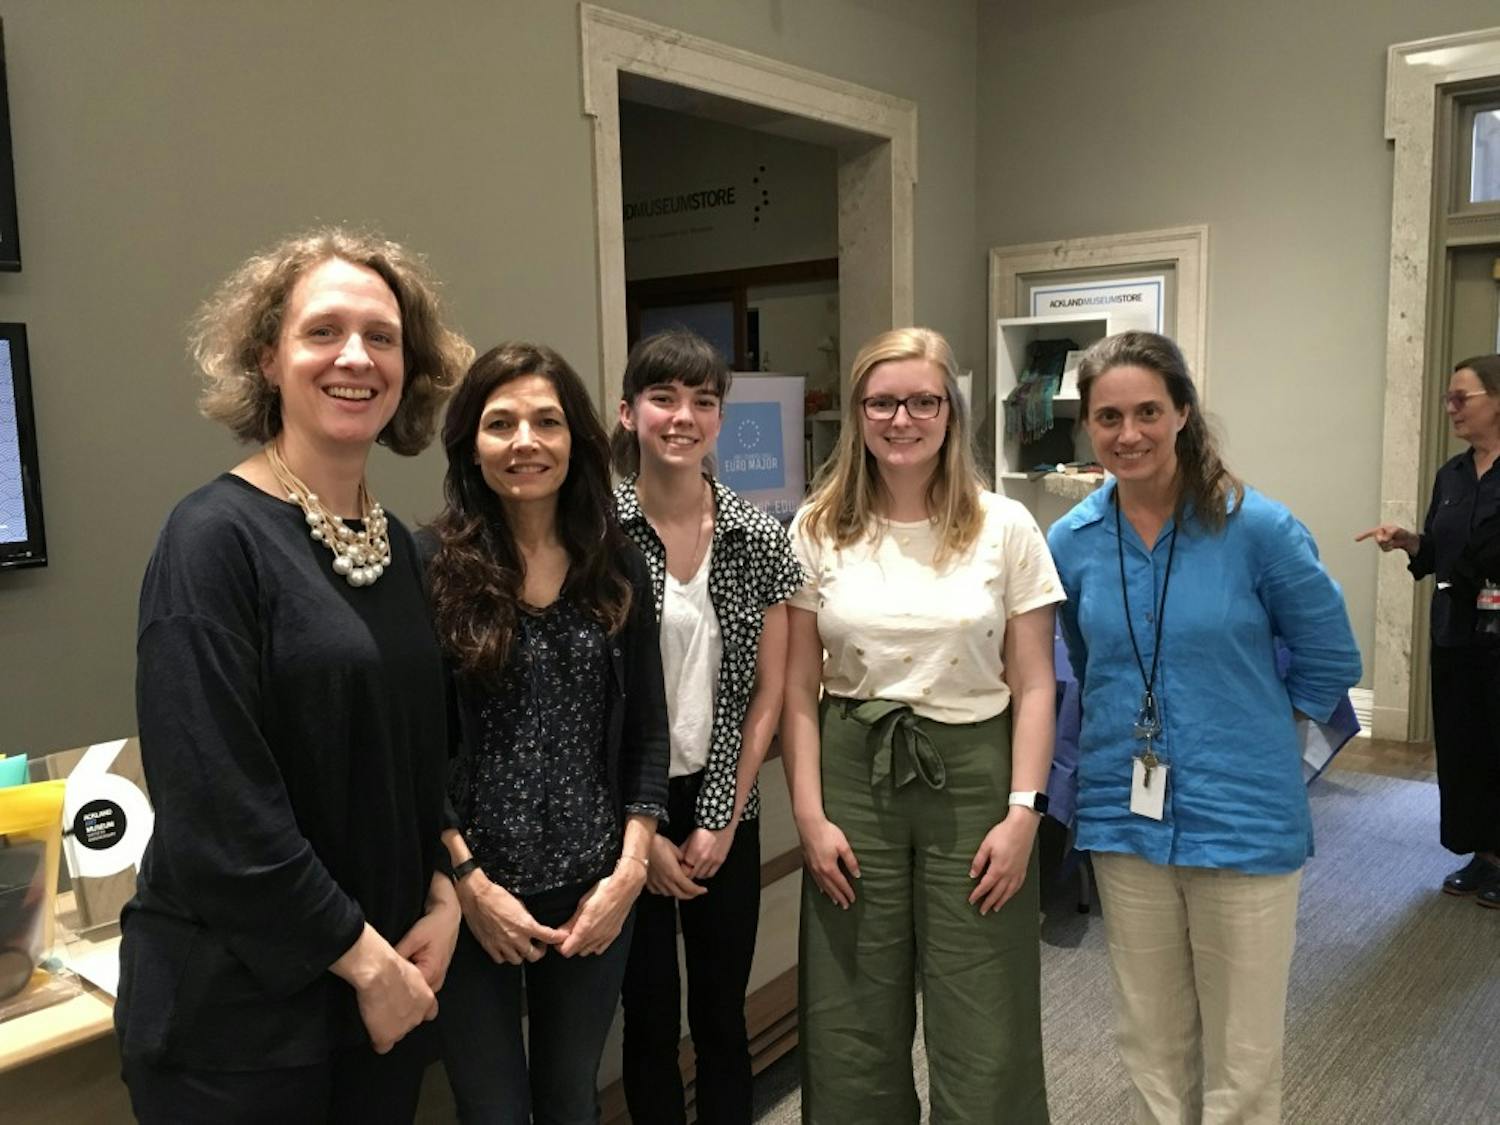 From left to right, Katie Lindner, Joanneke Elliott, Sara Elliott, Maura Kitchens, and Beth Mueller, all event organizers of Europe Week at UNC. Photo by Grant Peet.